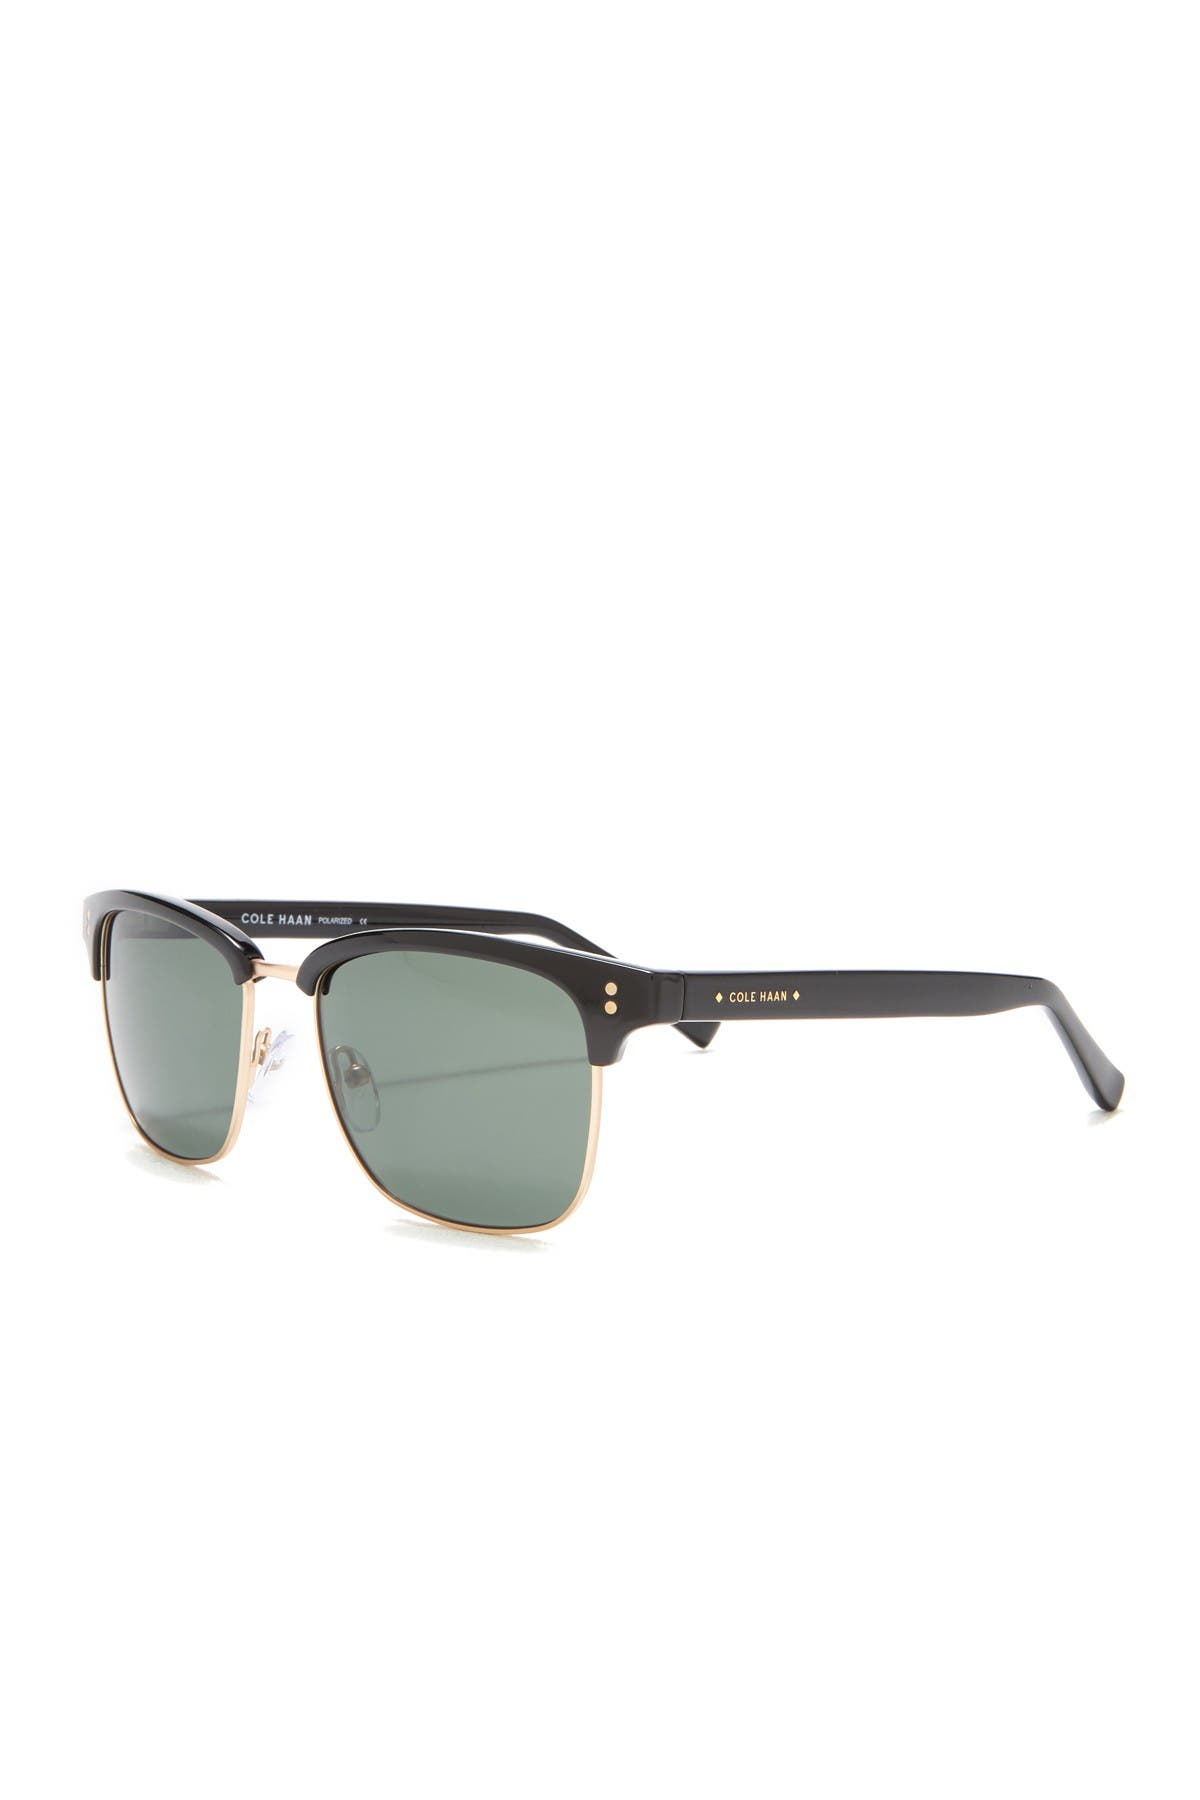 cole haan clubmaster sunglasses